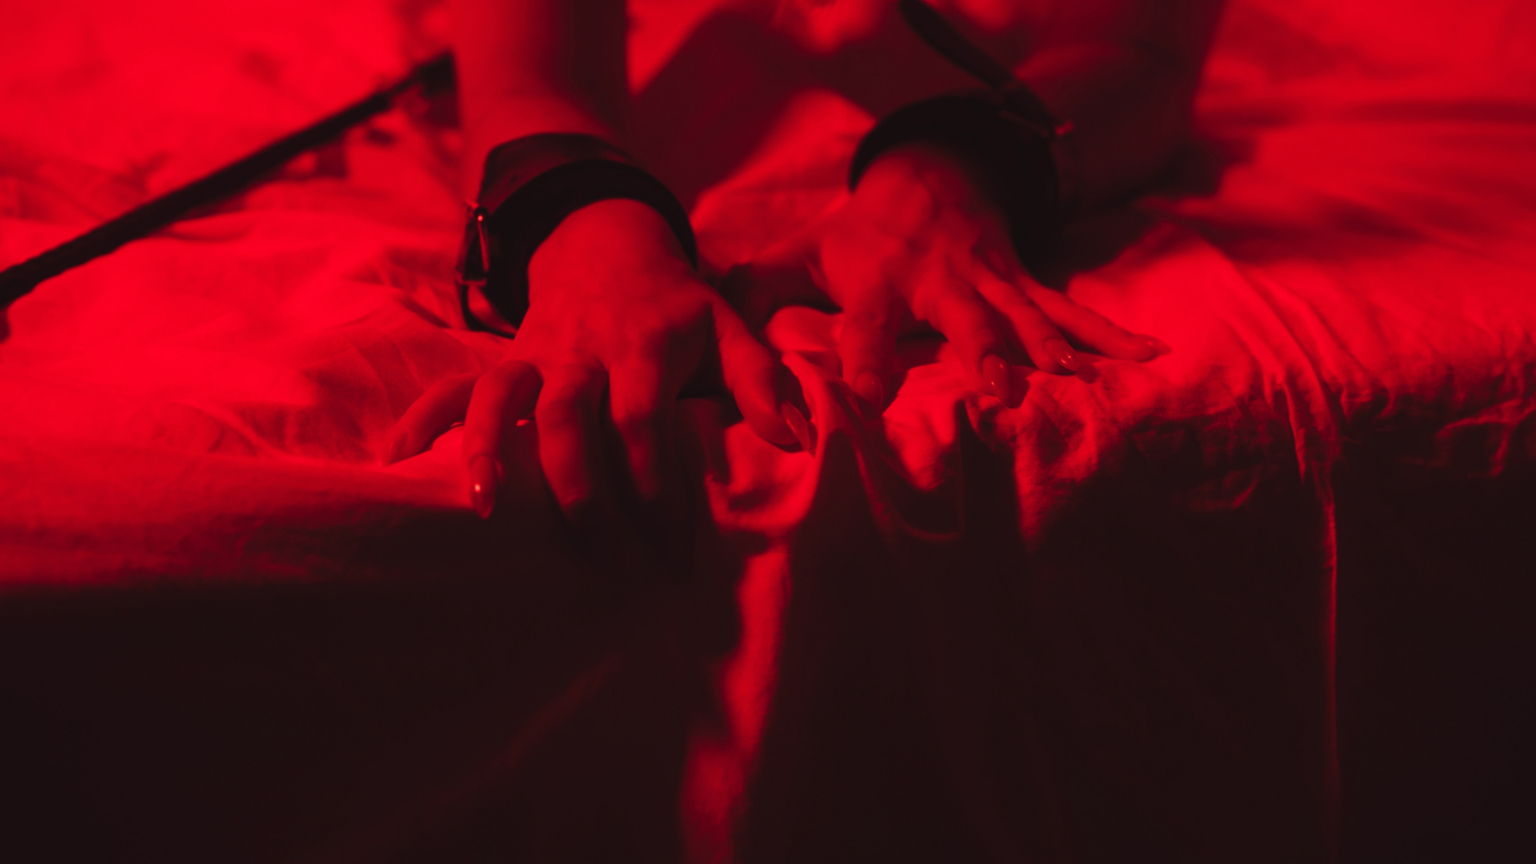 A feminine looking person's hands on a bed with handcuffs on